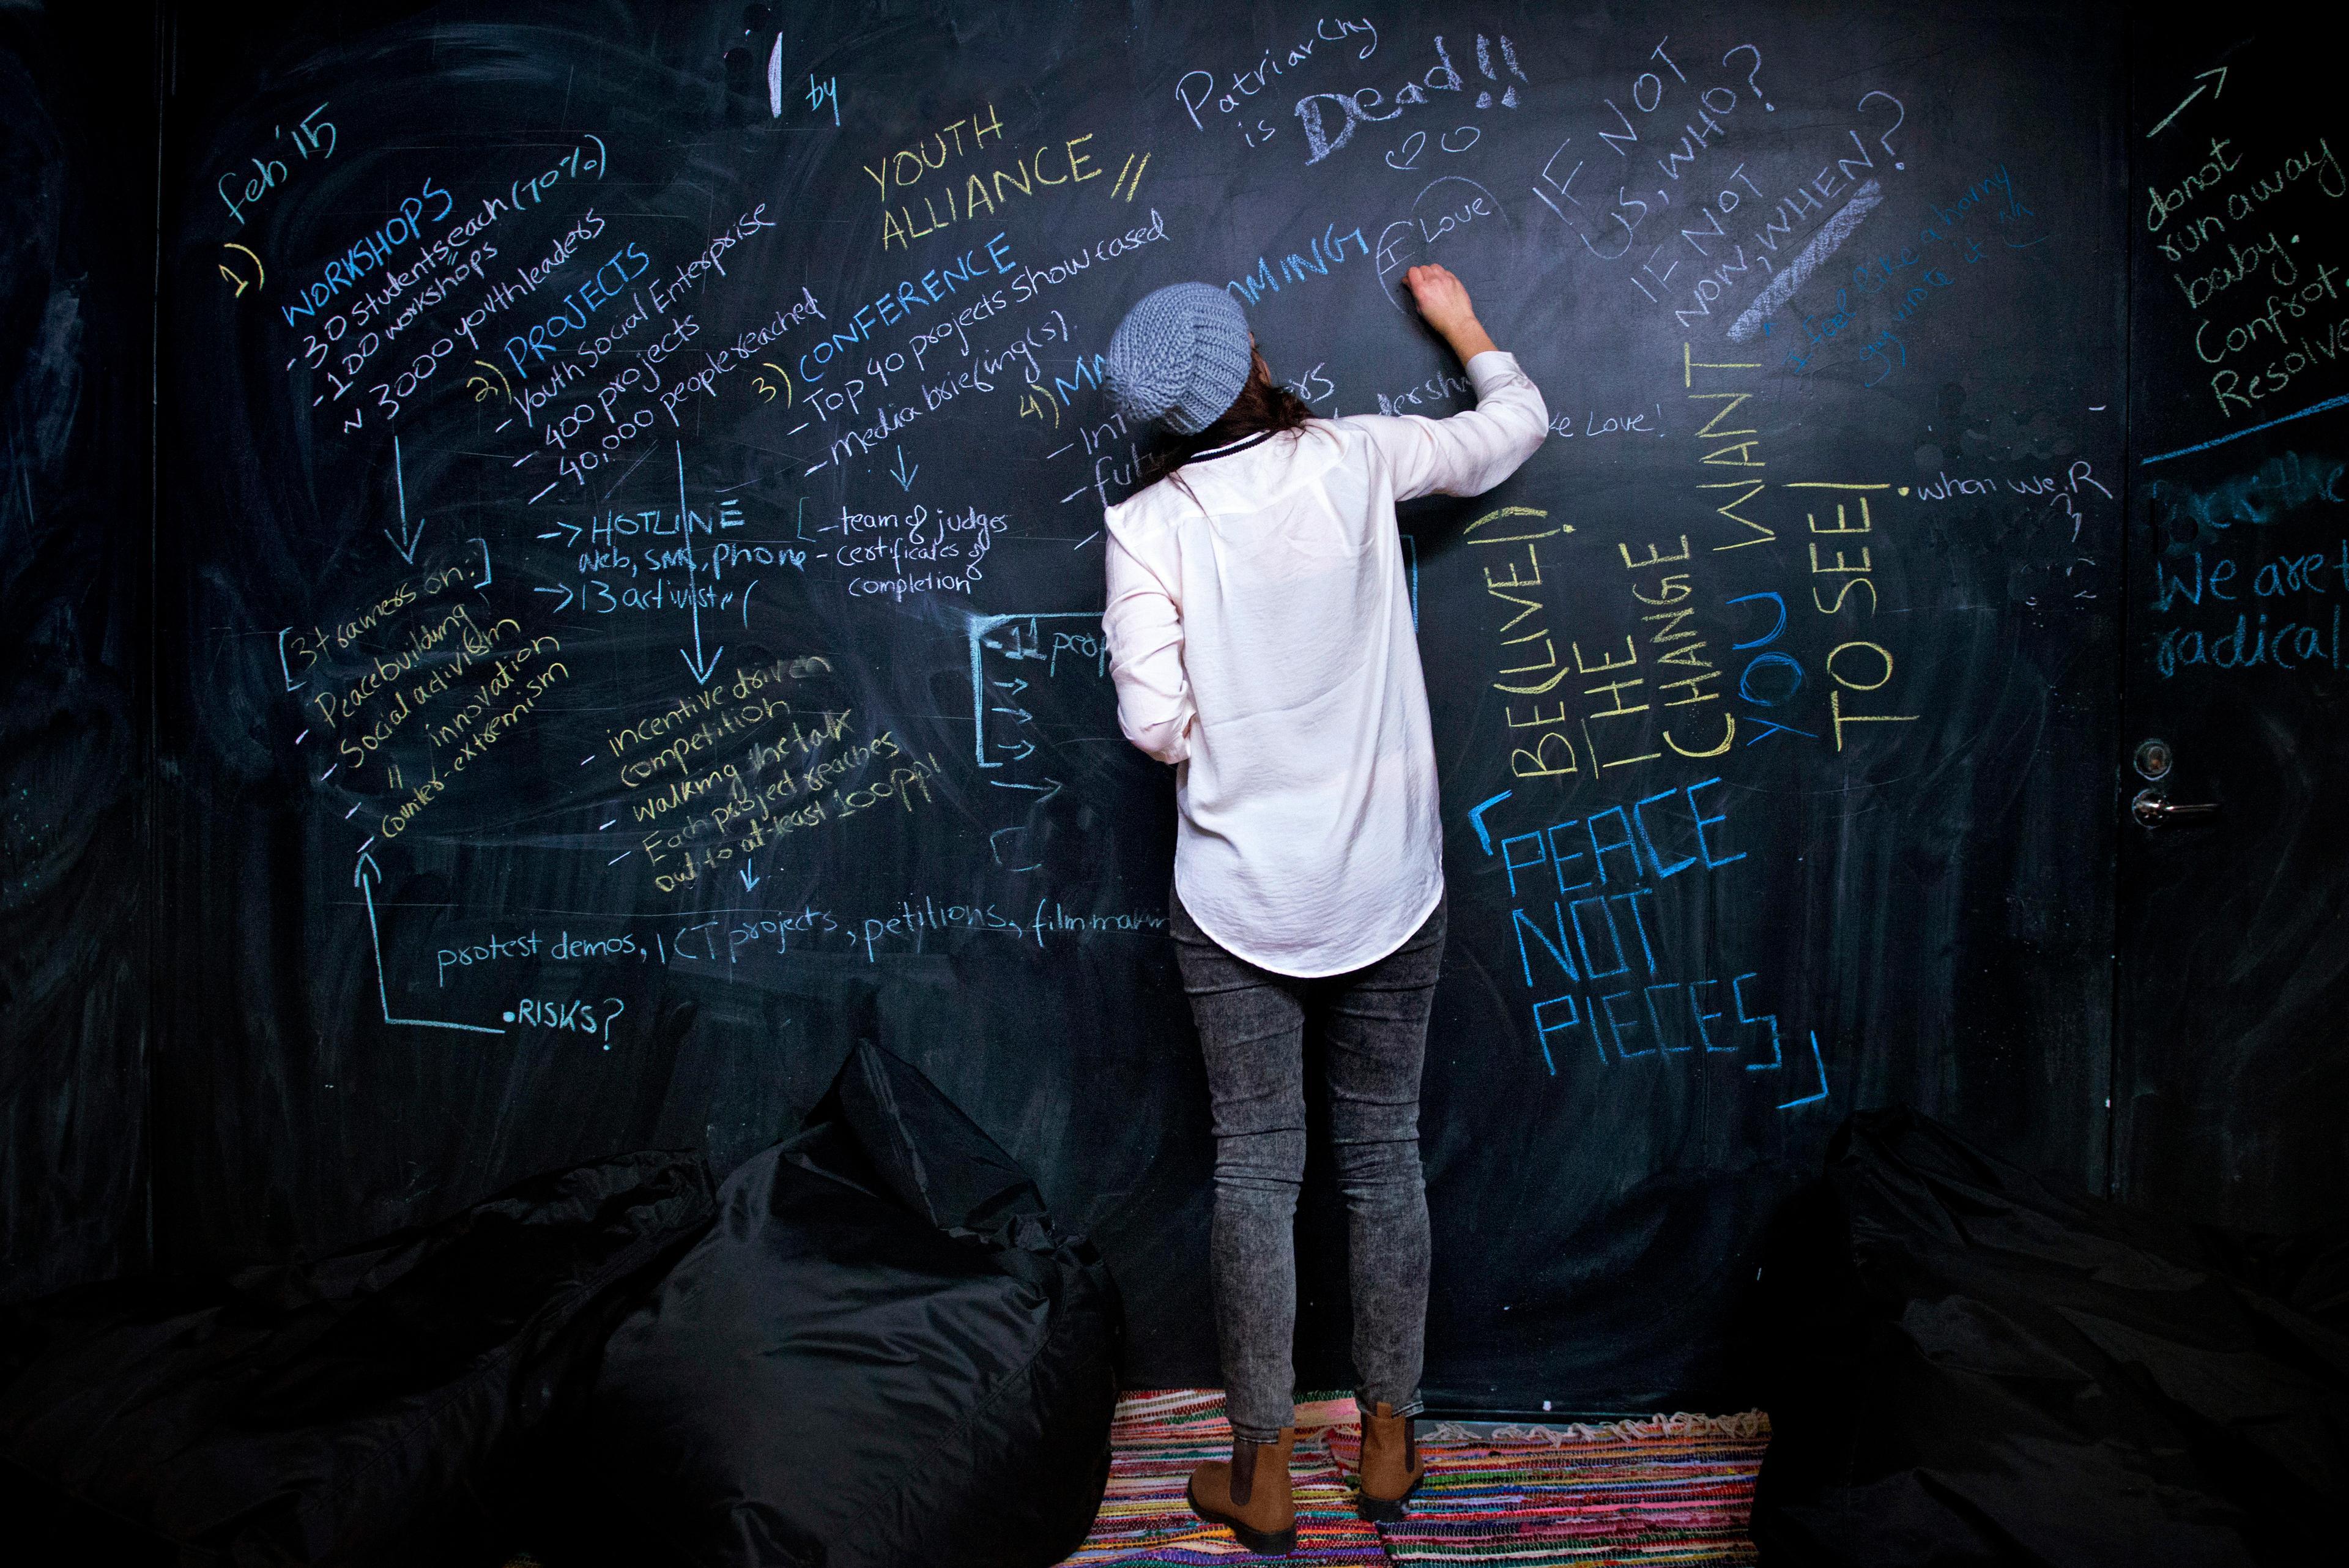 A person in a white shirt, dark trousers and a woolly hat is writing on a blackboard, turned away from the camera.